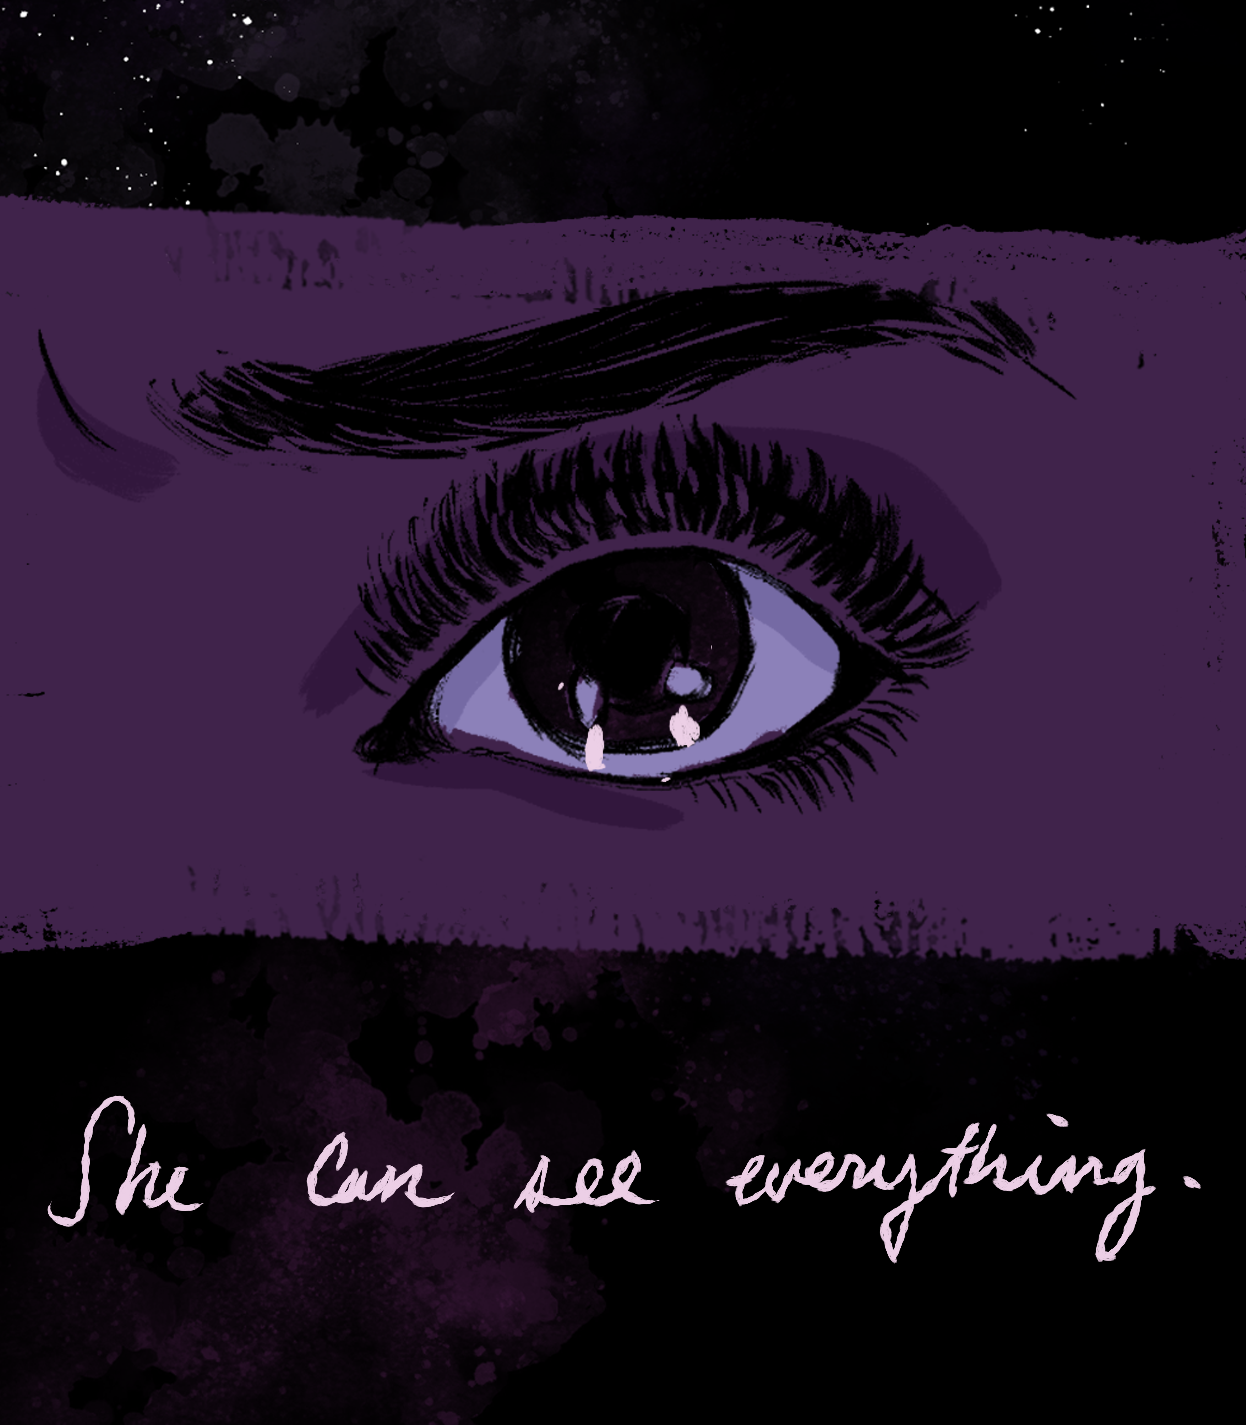 Rey's eye, open. "She can see everything."